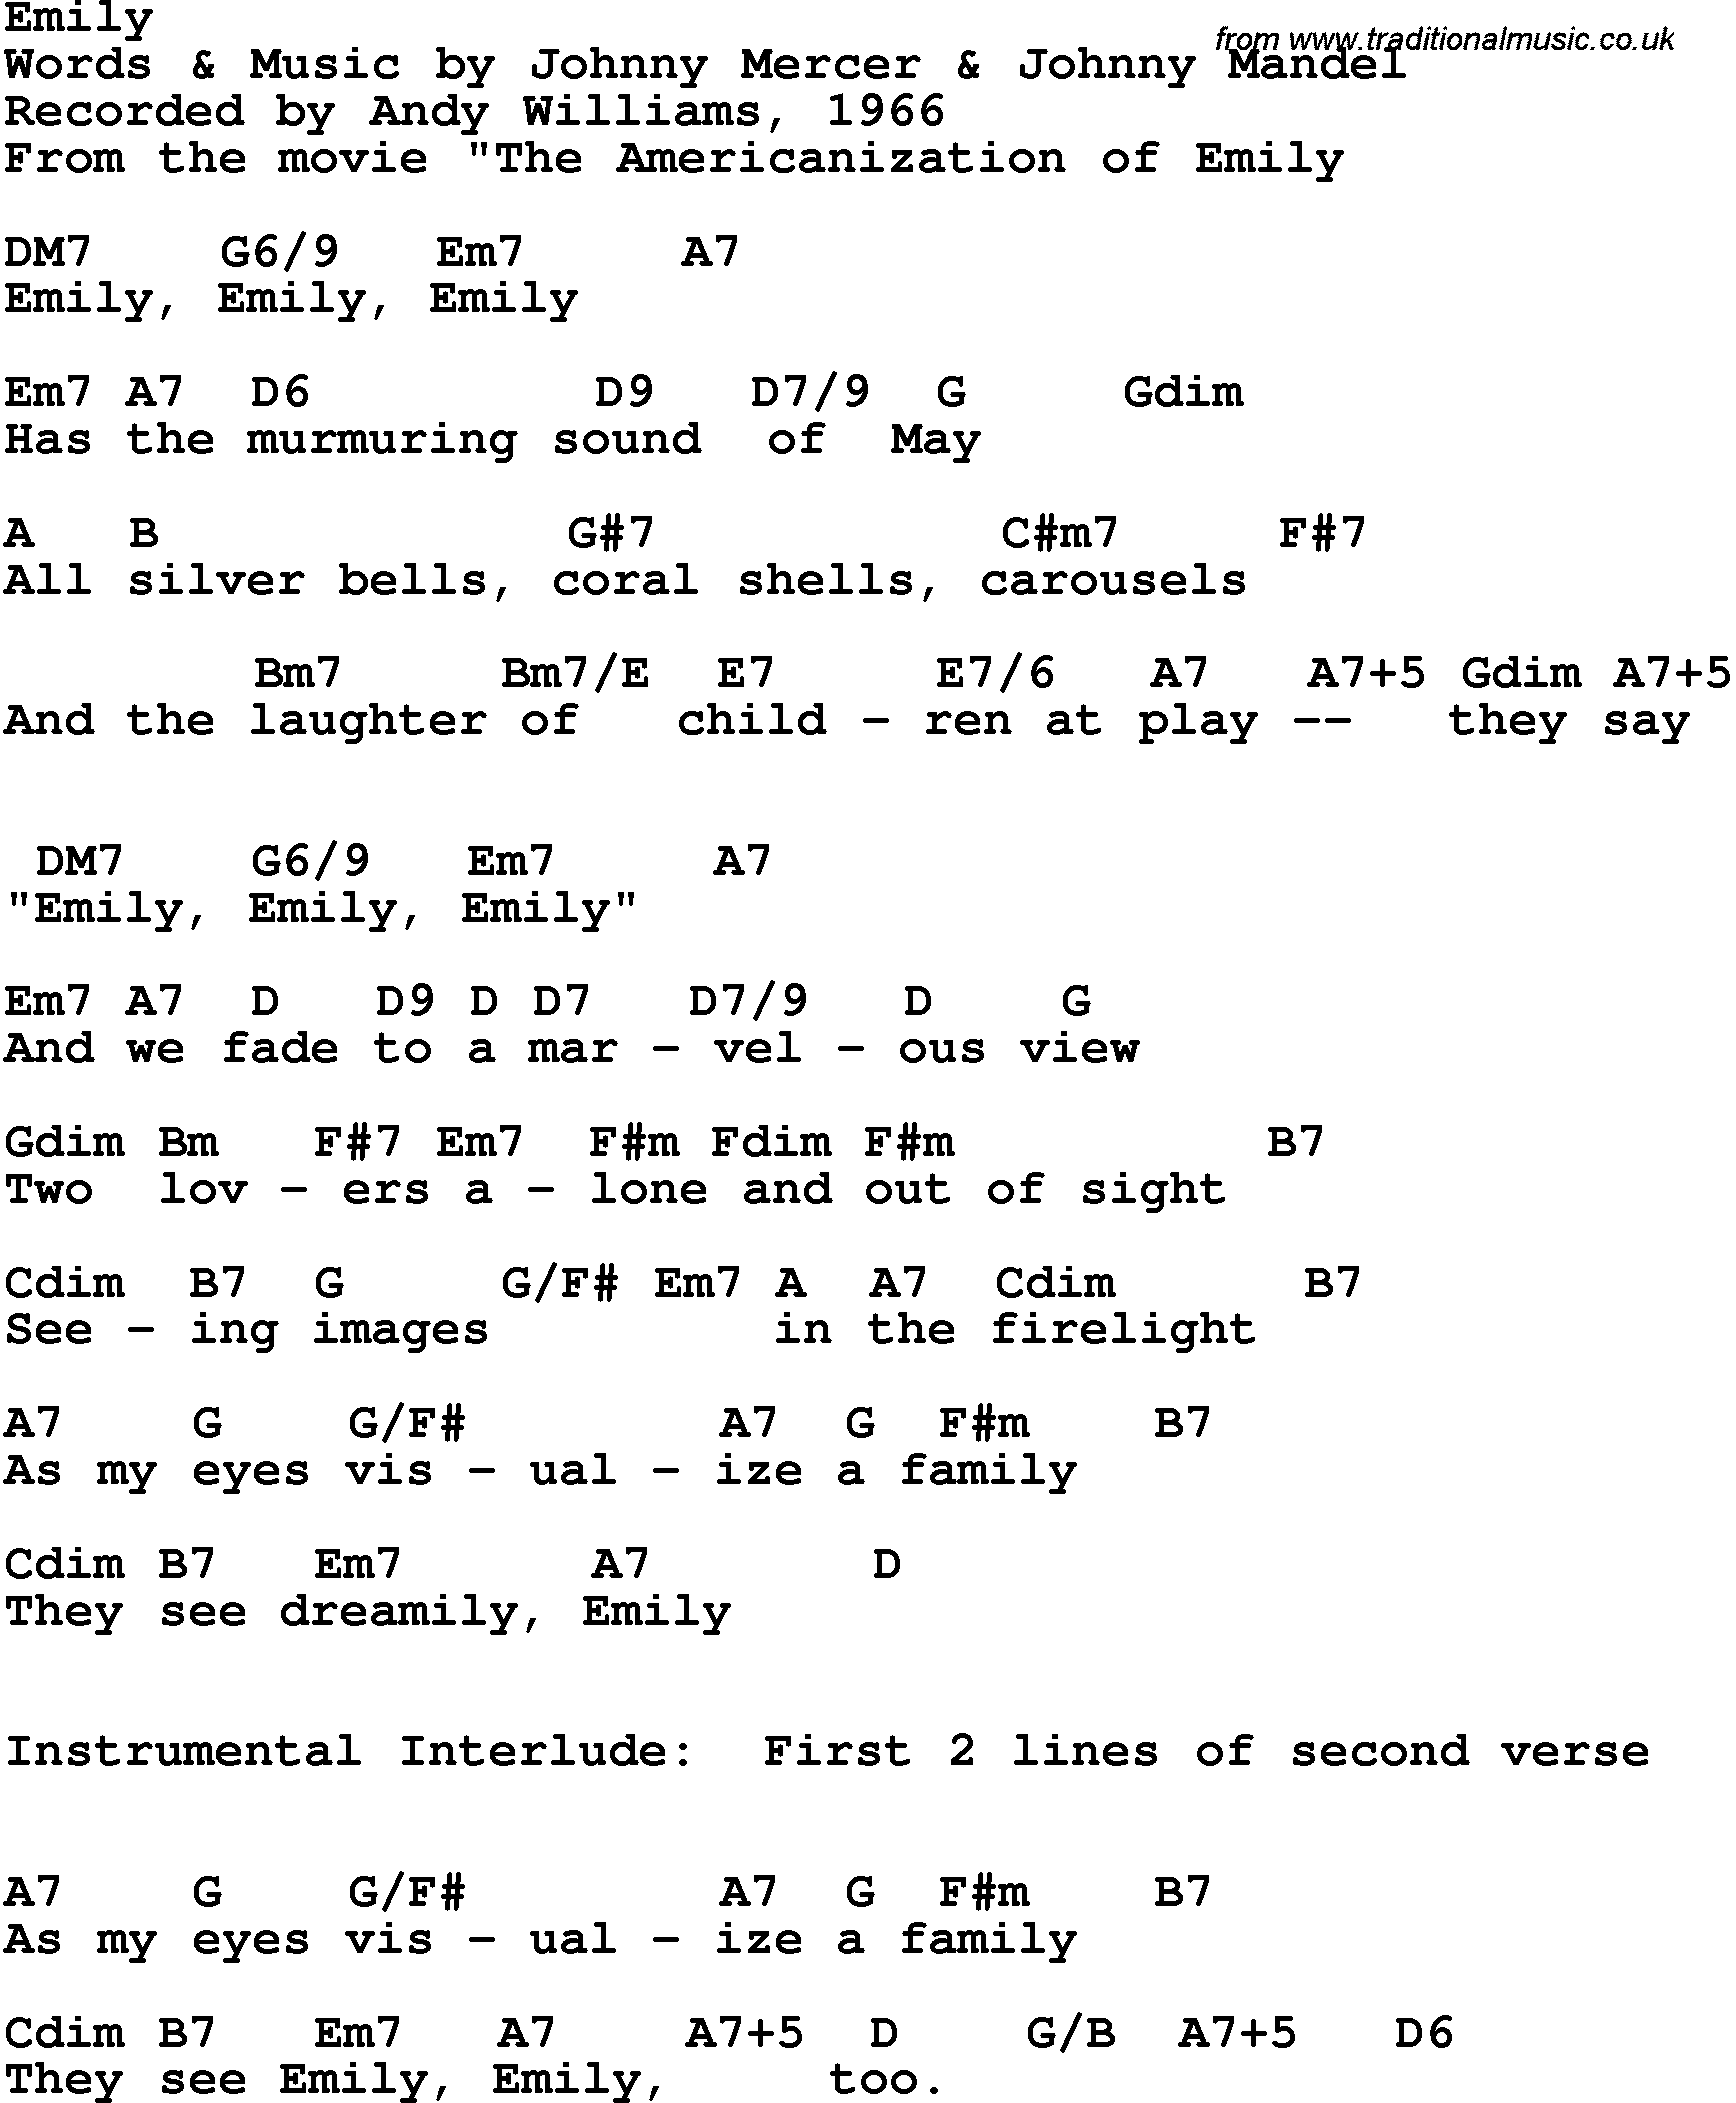 Song Lyrics with guitar chords for Emily - Andy Williams, 1966